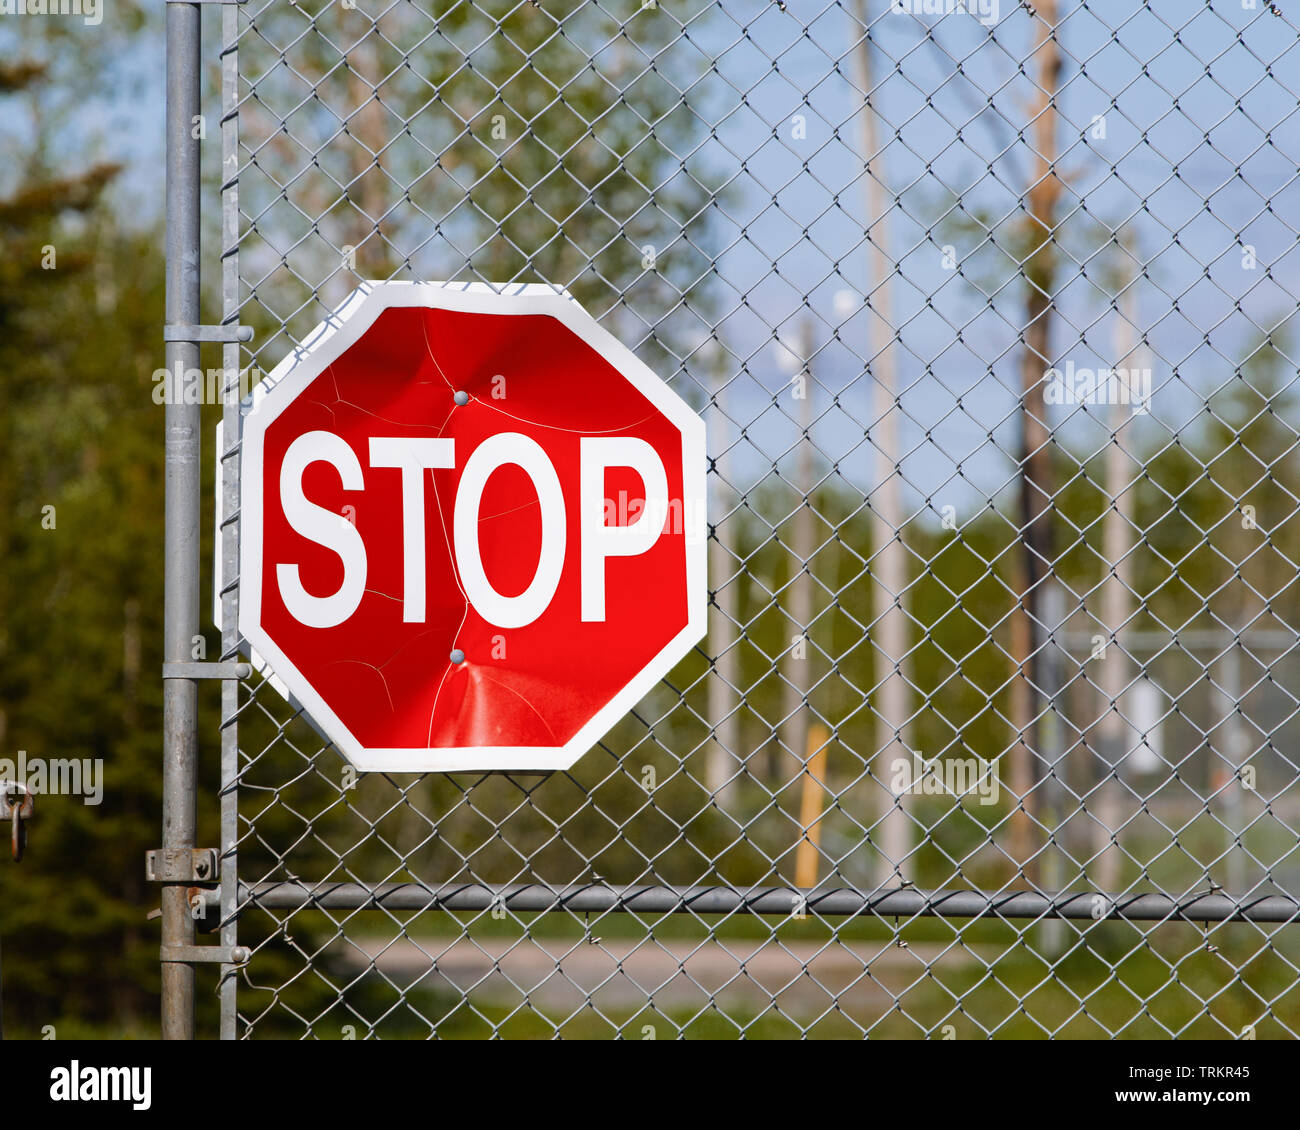 Stop sign on metal gate. Stock Photo